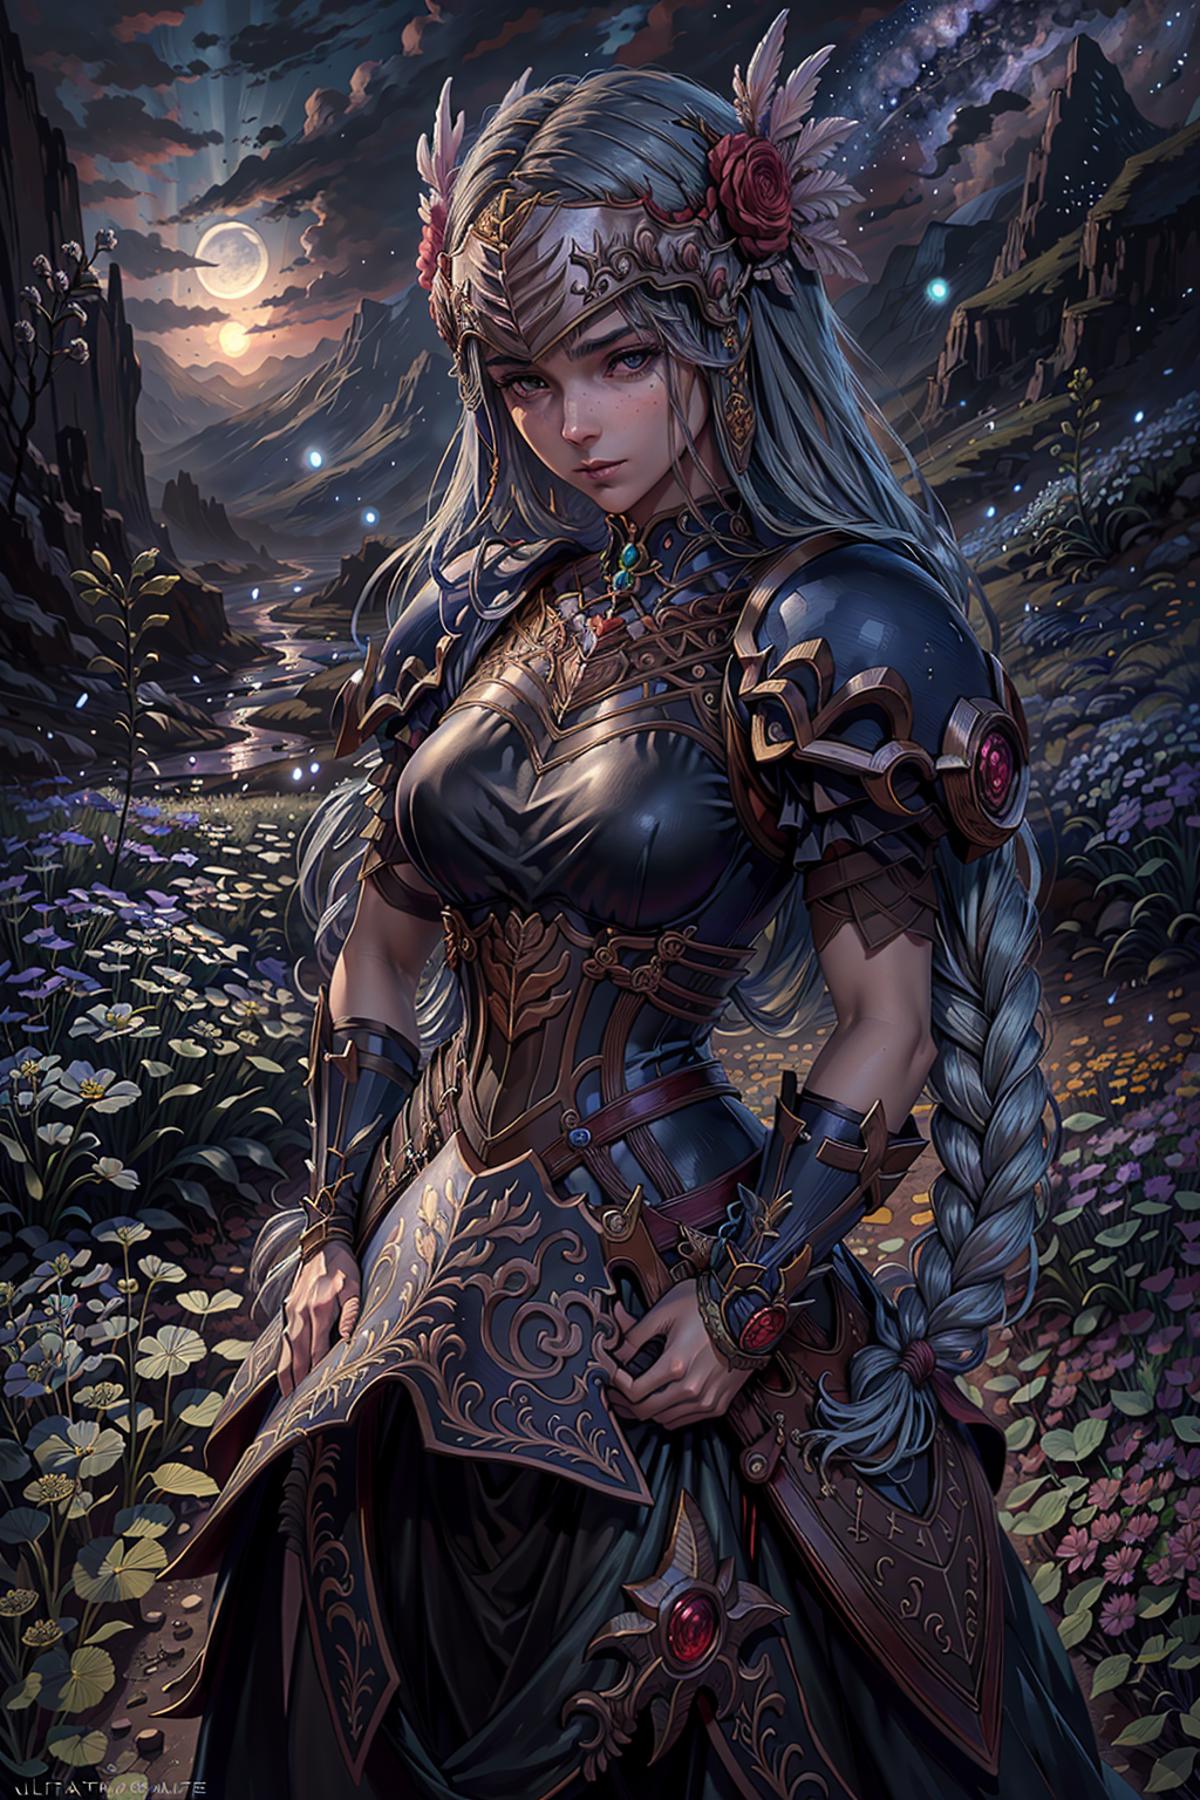 A woman in a fantasy setting, with a sword and a blue dress, posing in front of mountains.